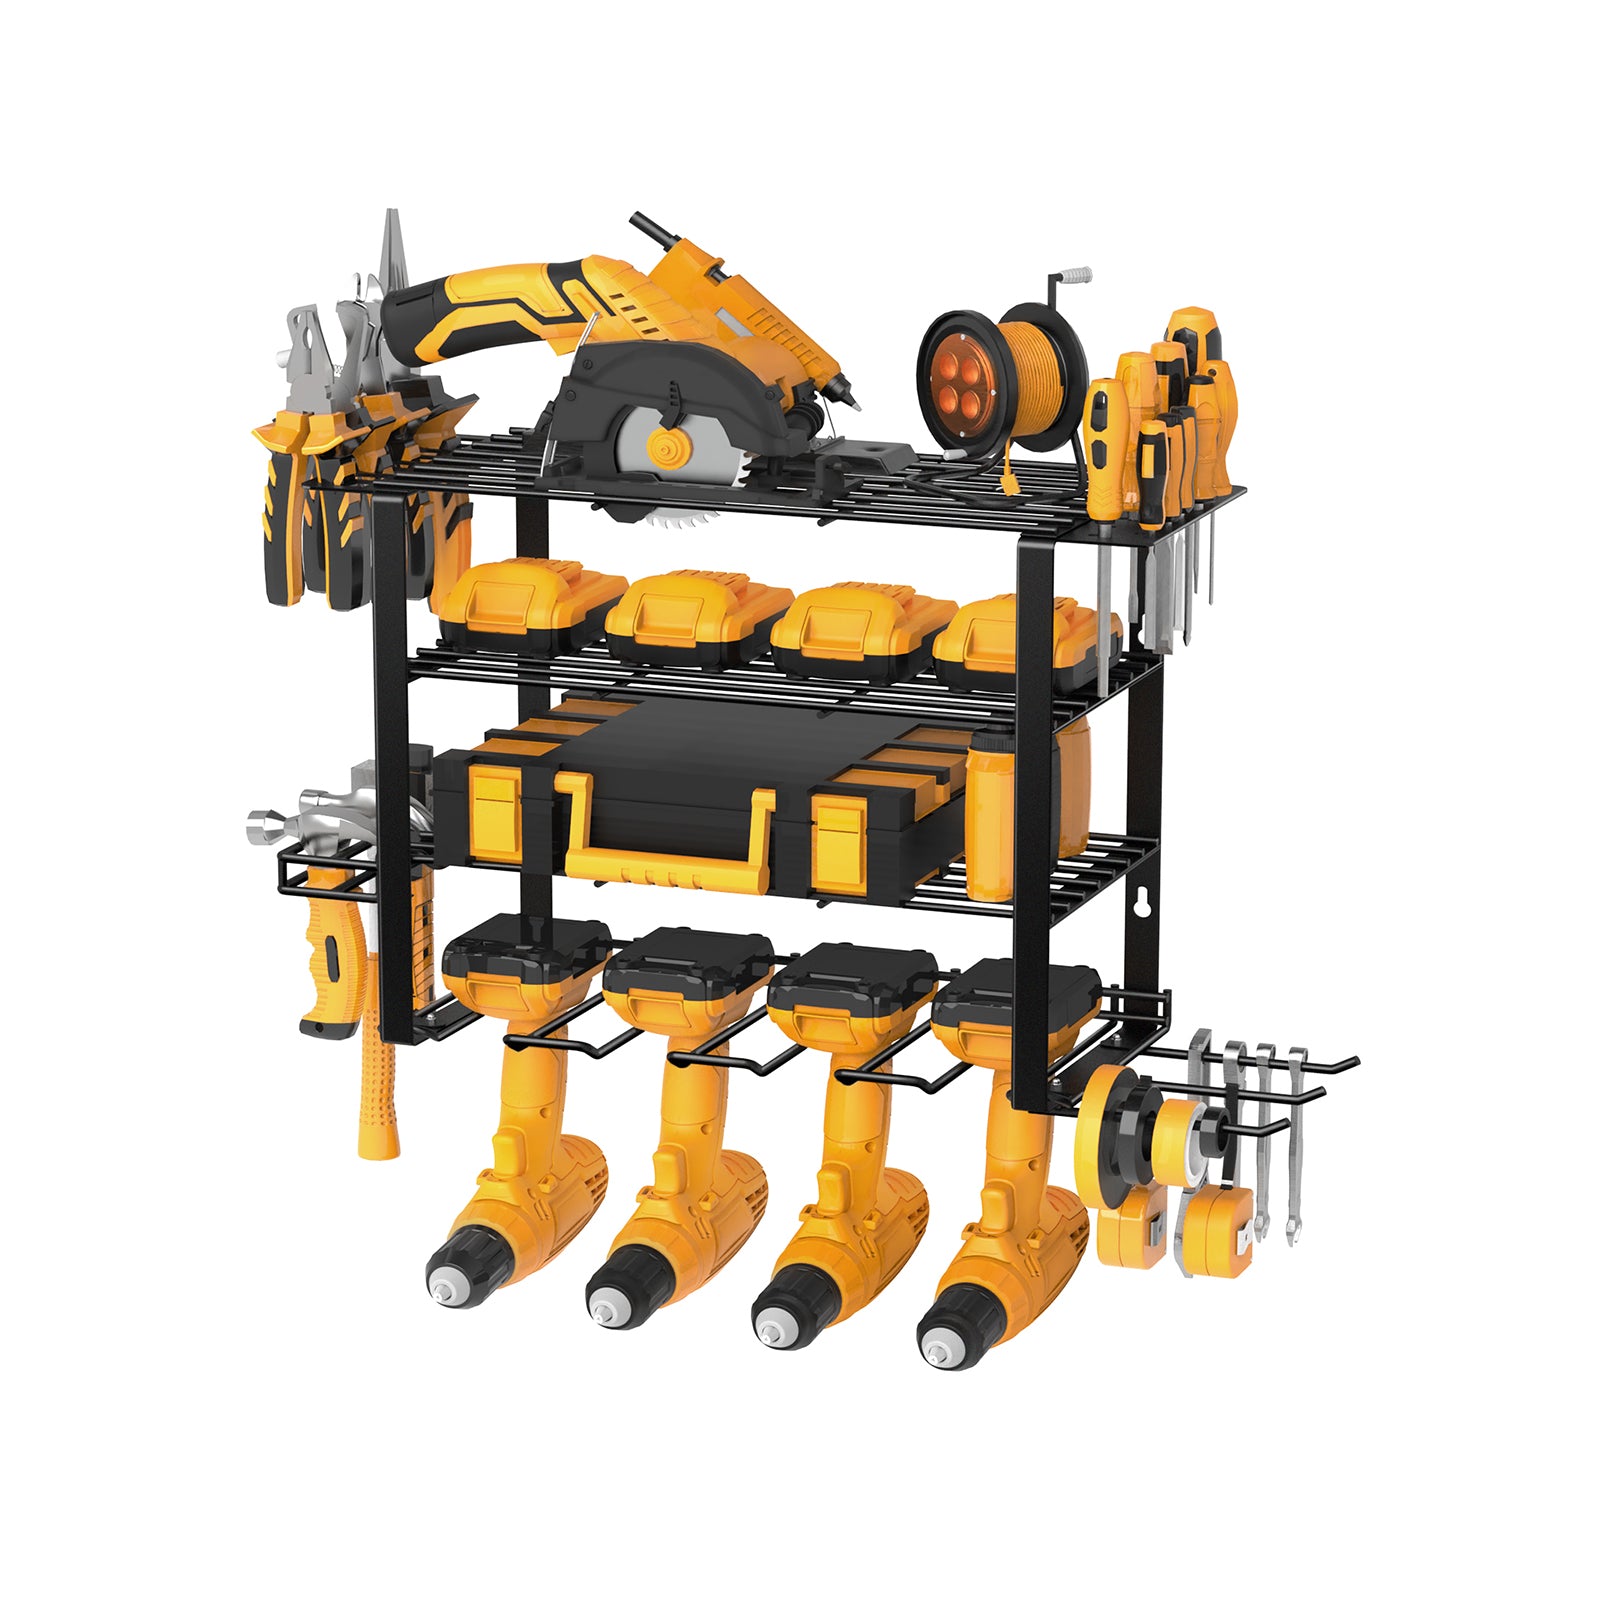 4-Tier Power Tool Organizer, Wall-Mounted Storage for Workshop